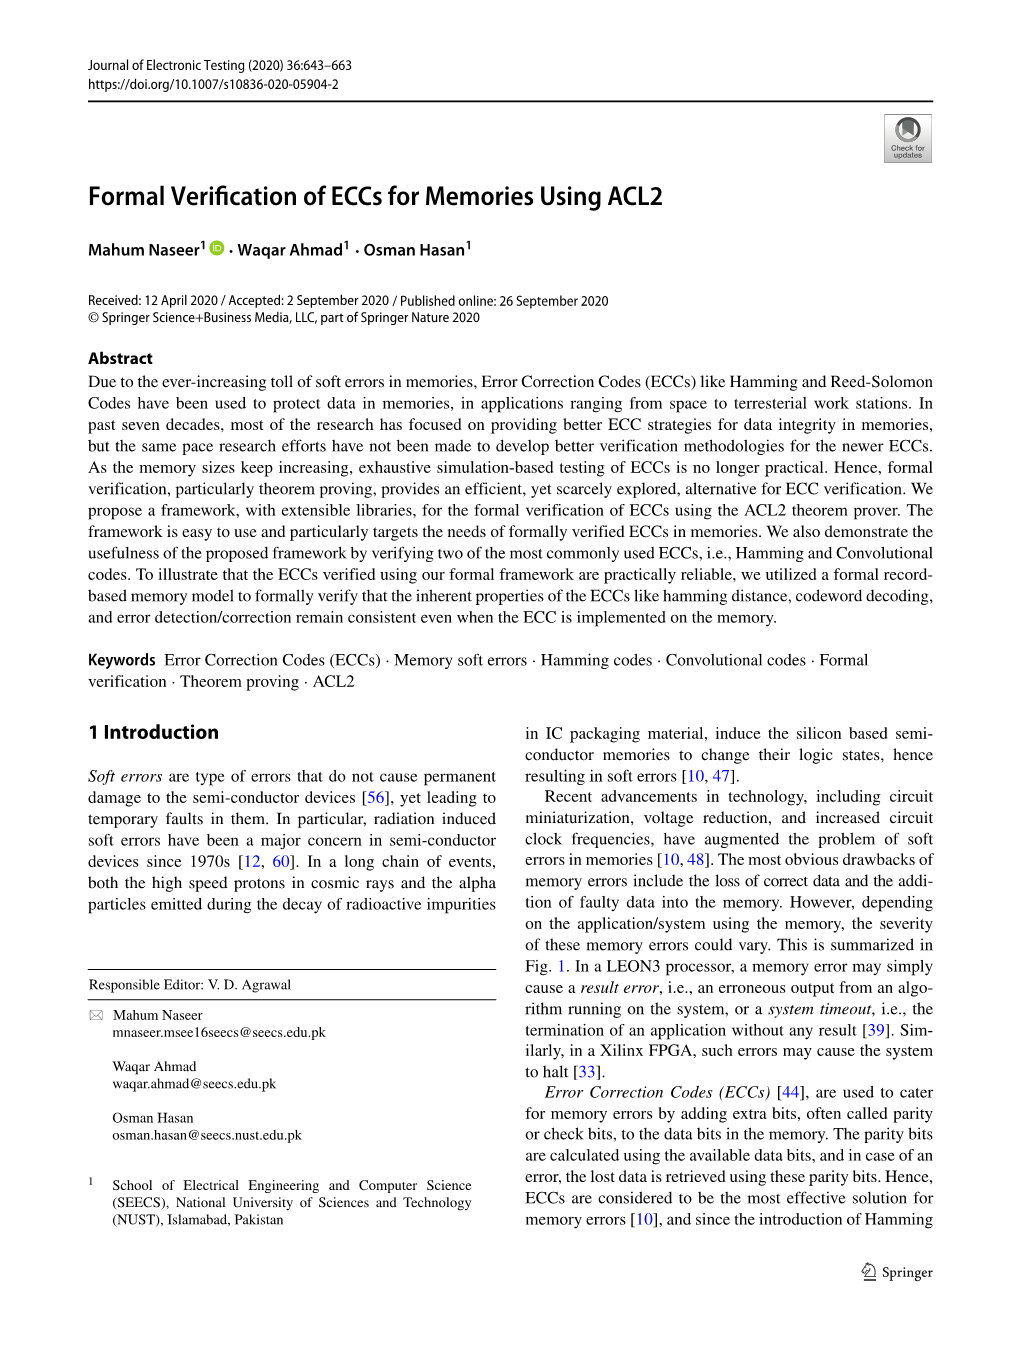 Formal Verification of Eccs for Memories Using ACL2